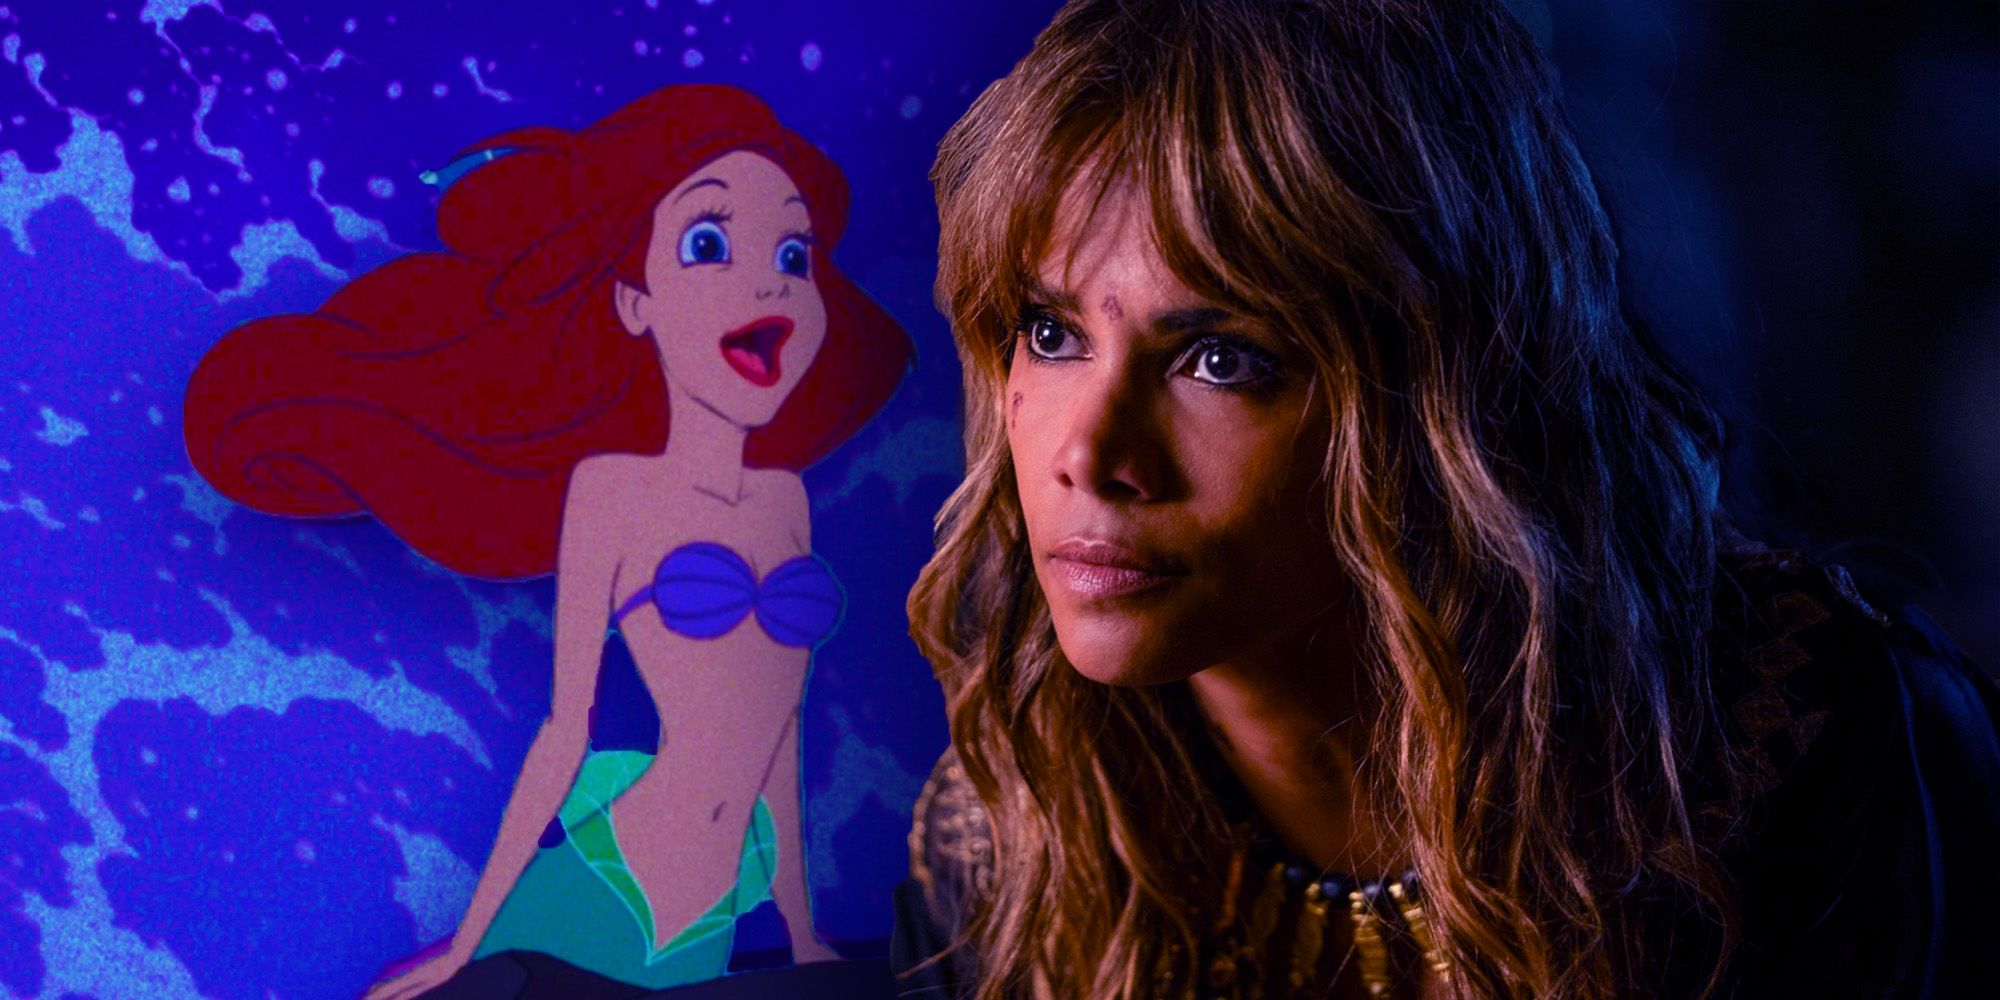 Halle Berry Reacts To Being Mistaken For The Little Mermaid's Halle Bailey